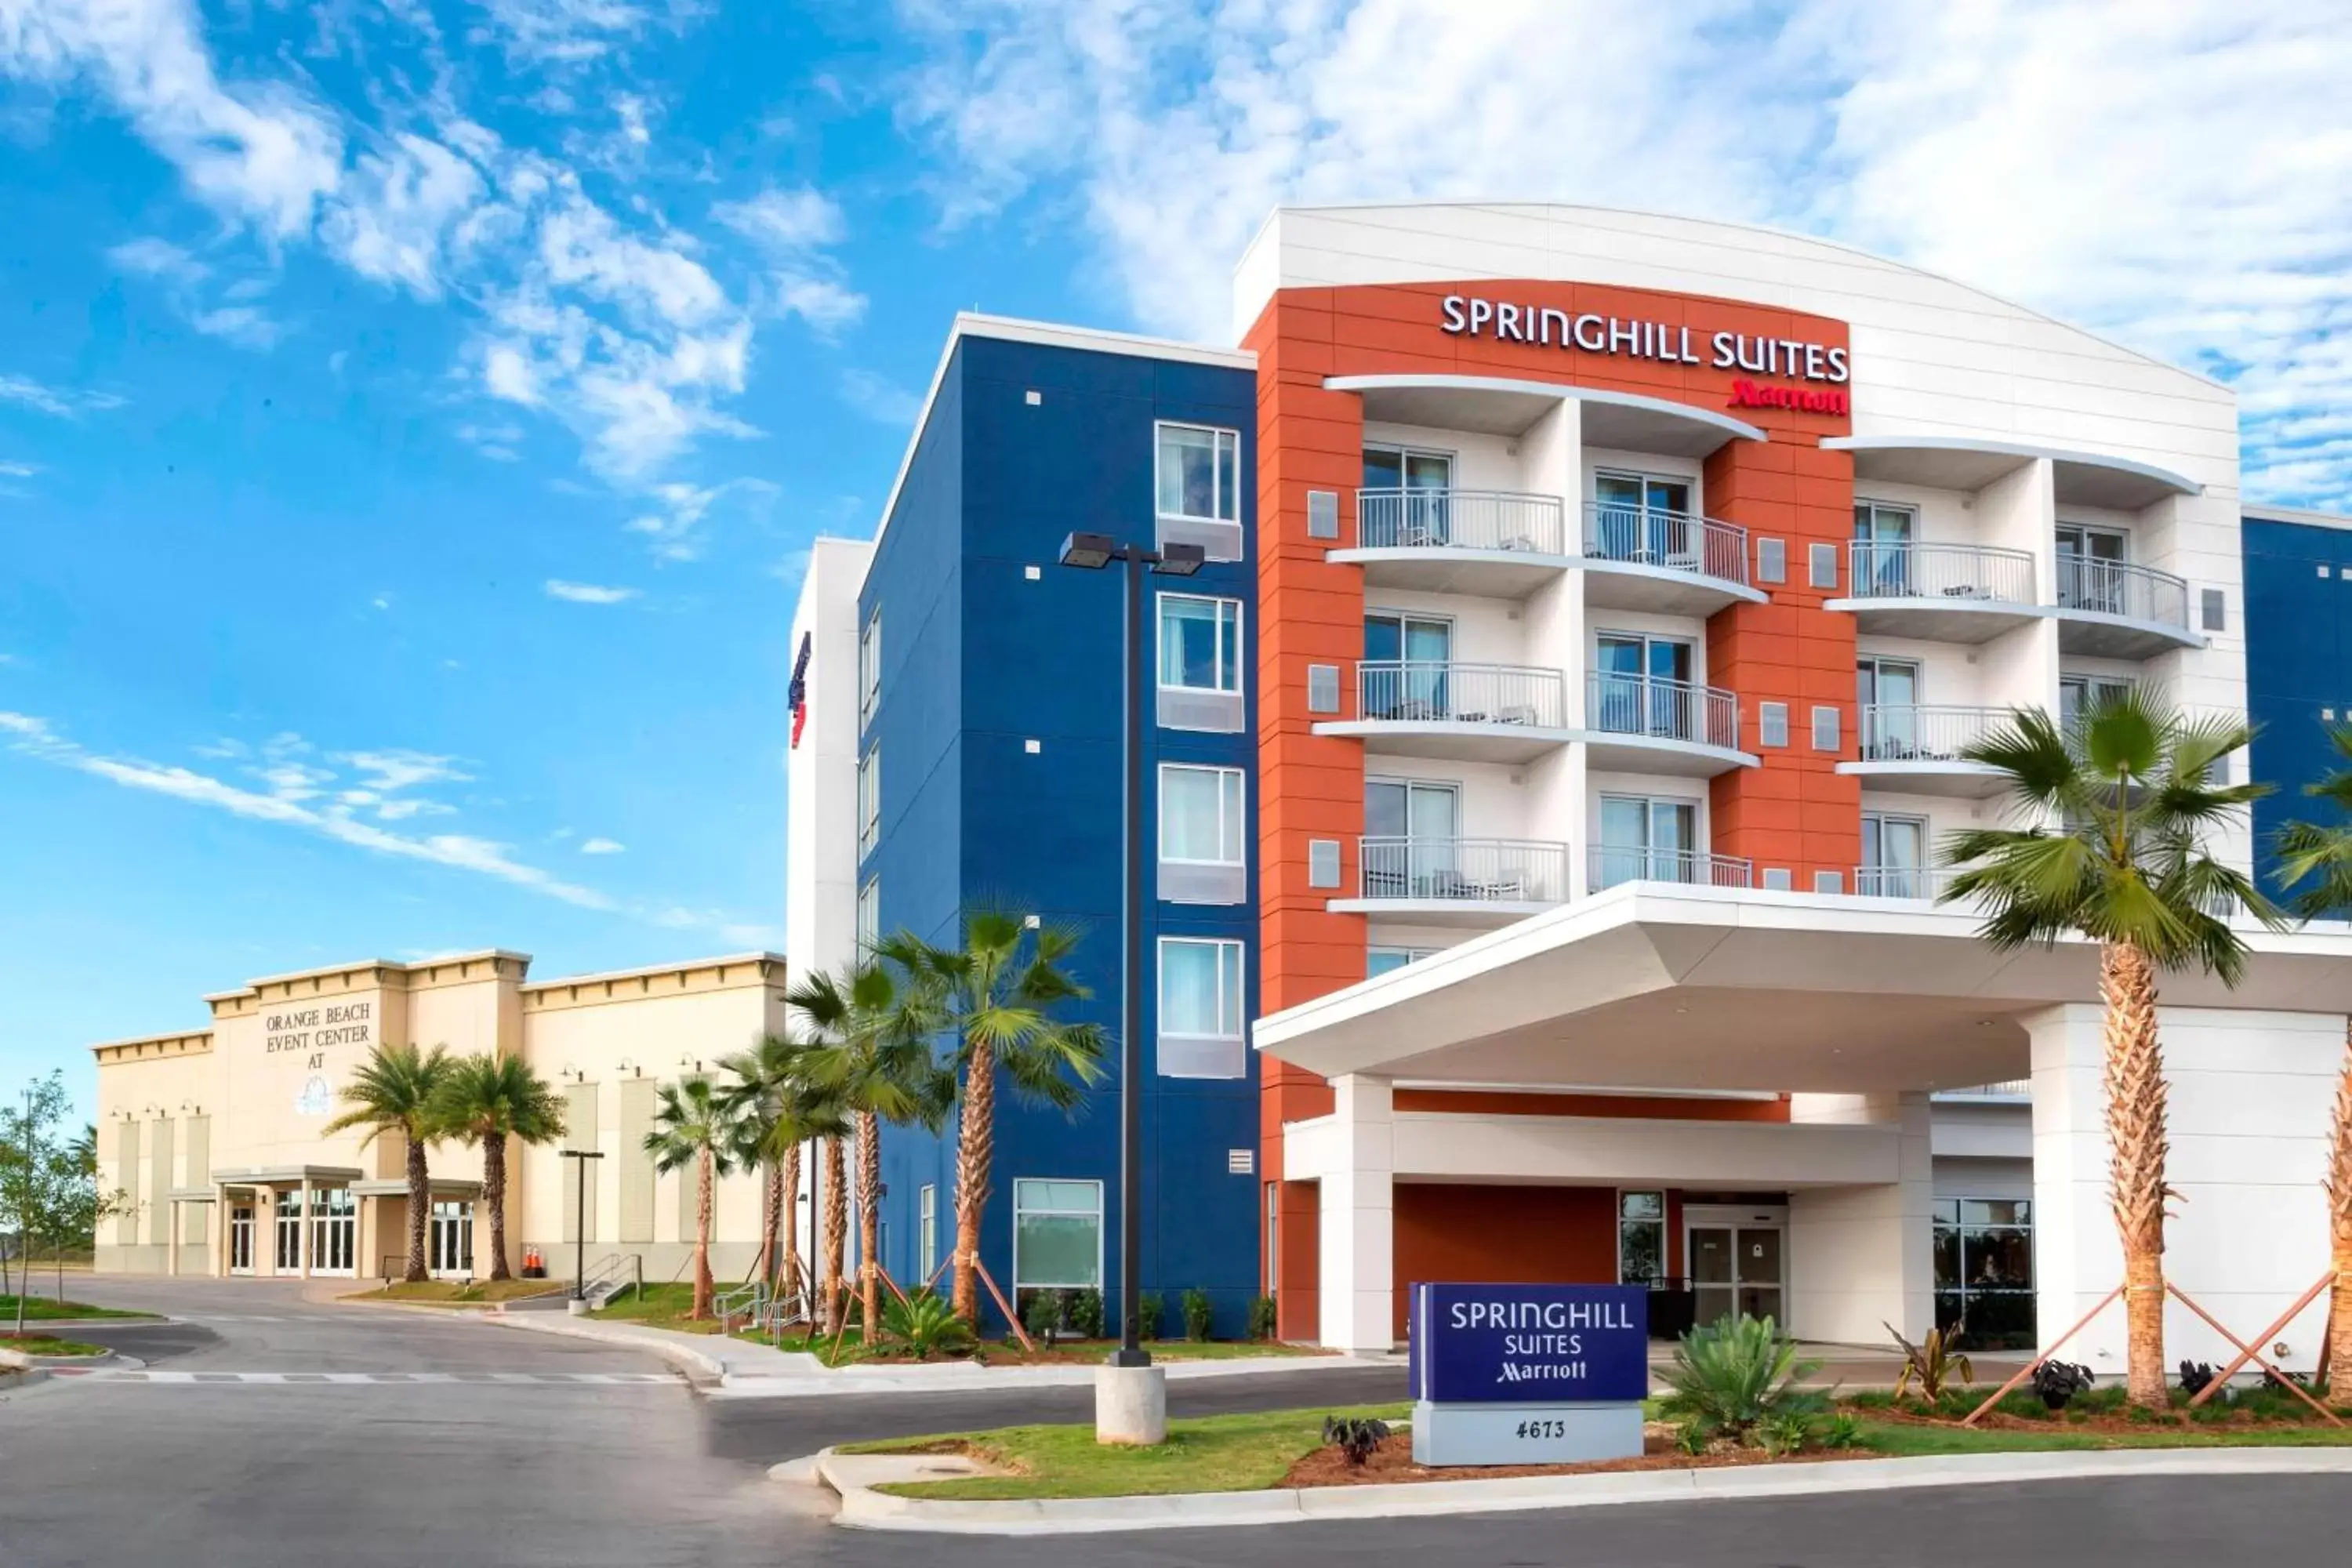 Property Building in SpringHill Suites Orange Beach at The Wharf